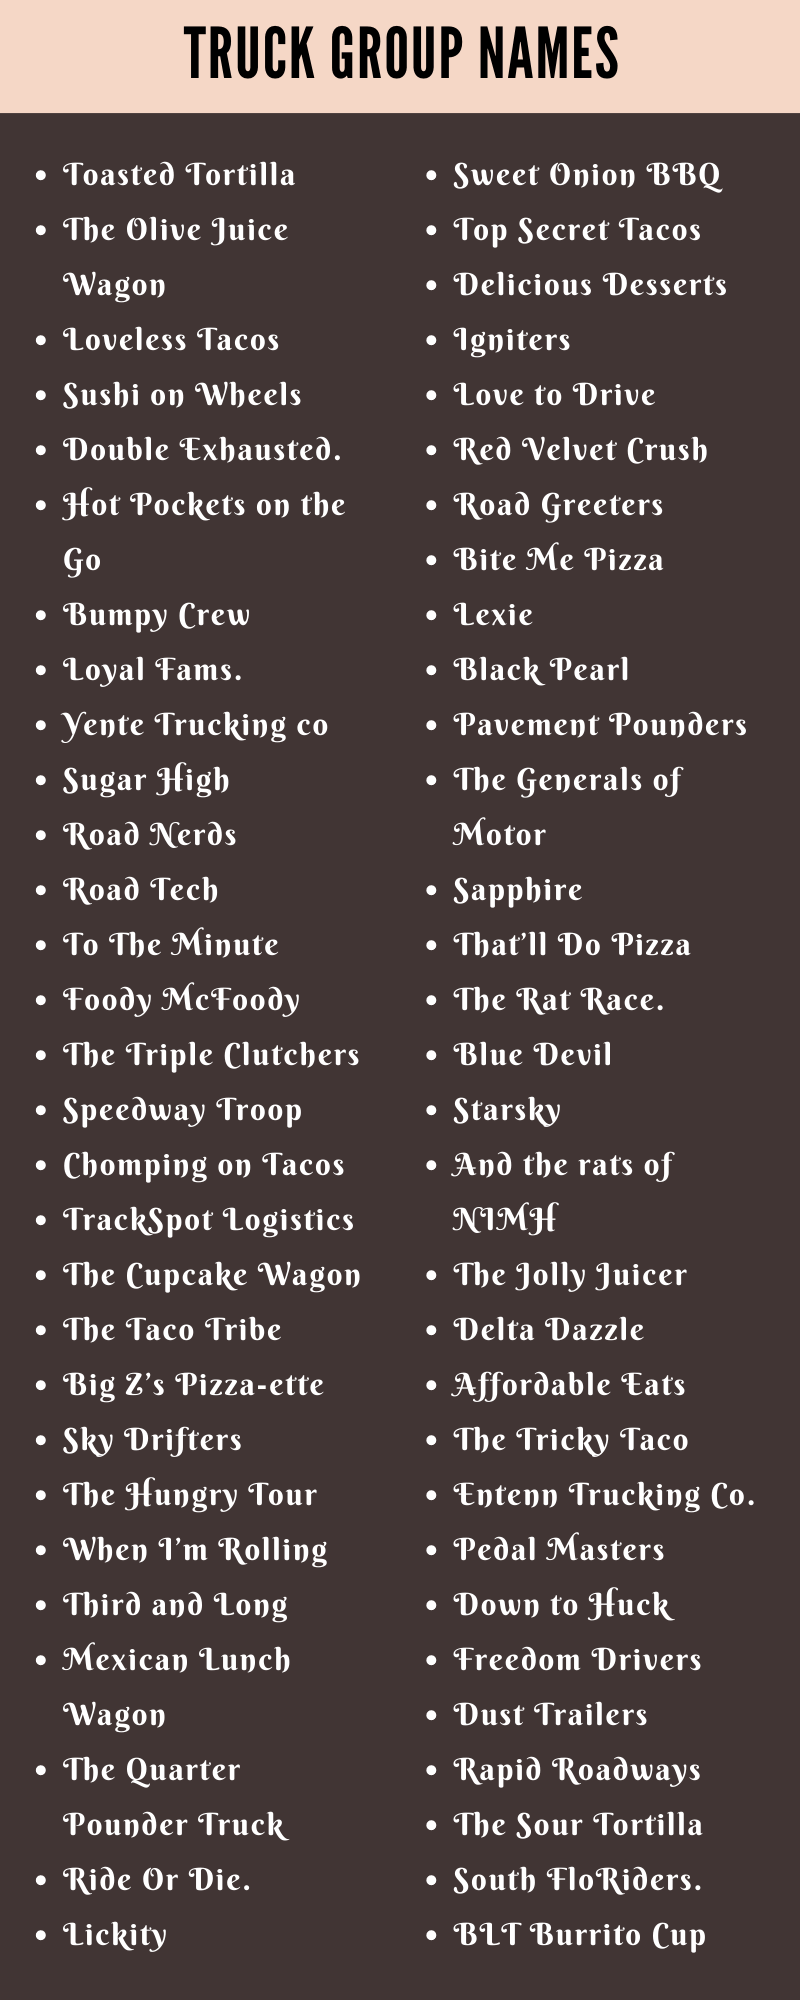 Truck Group Names